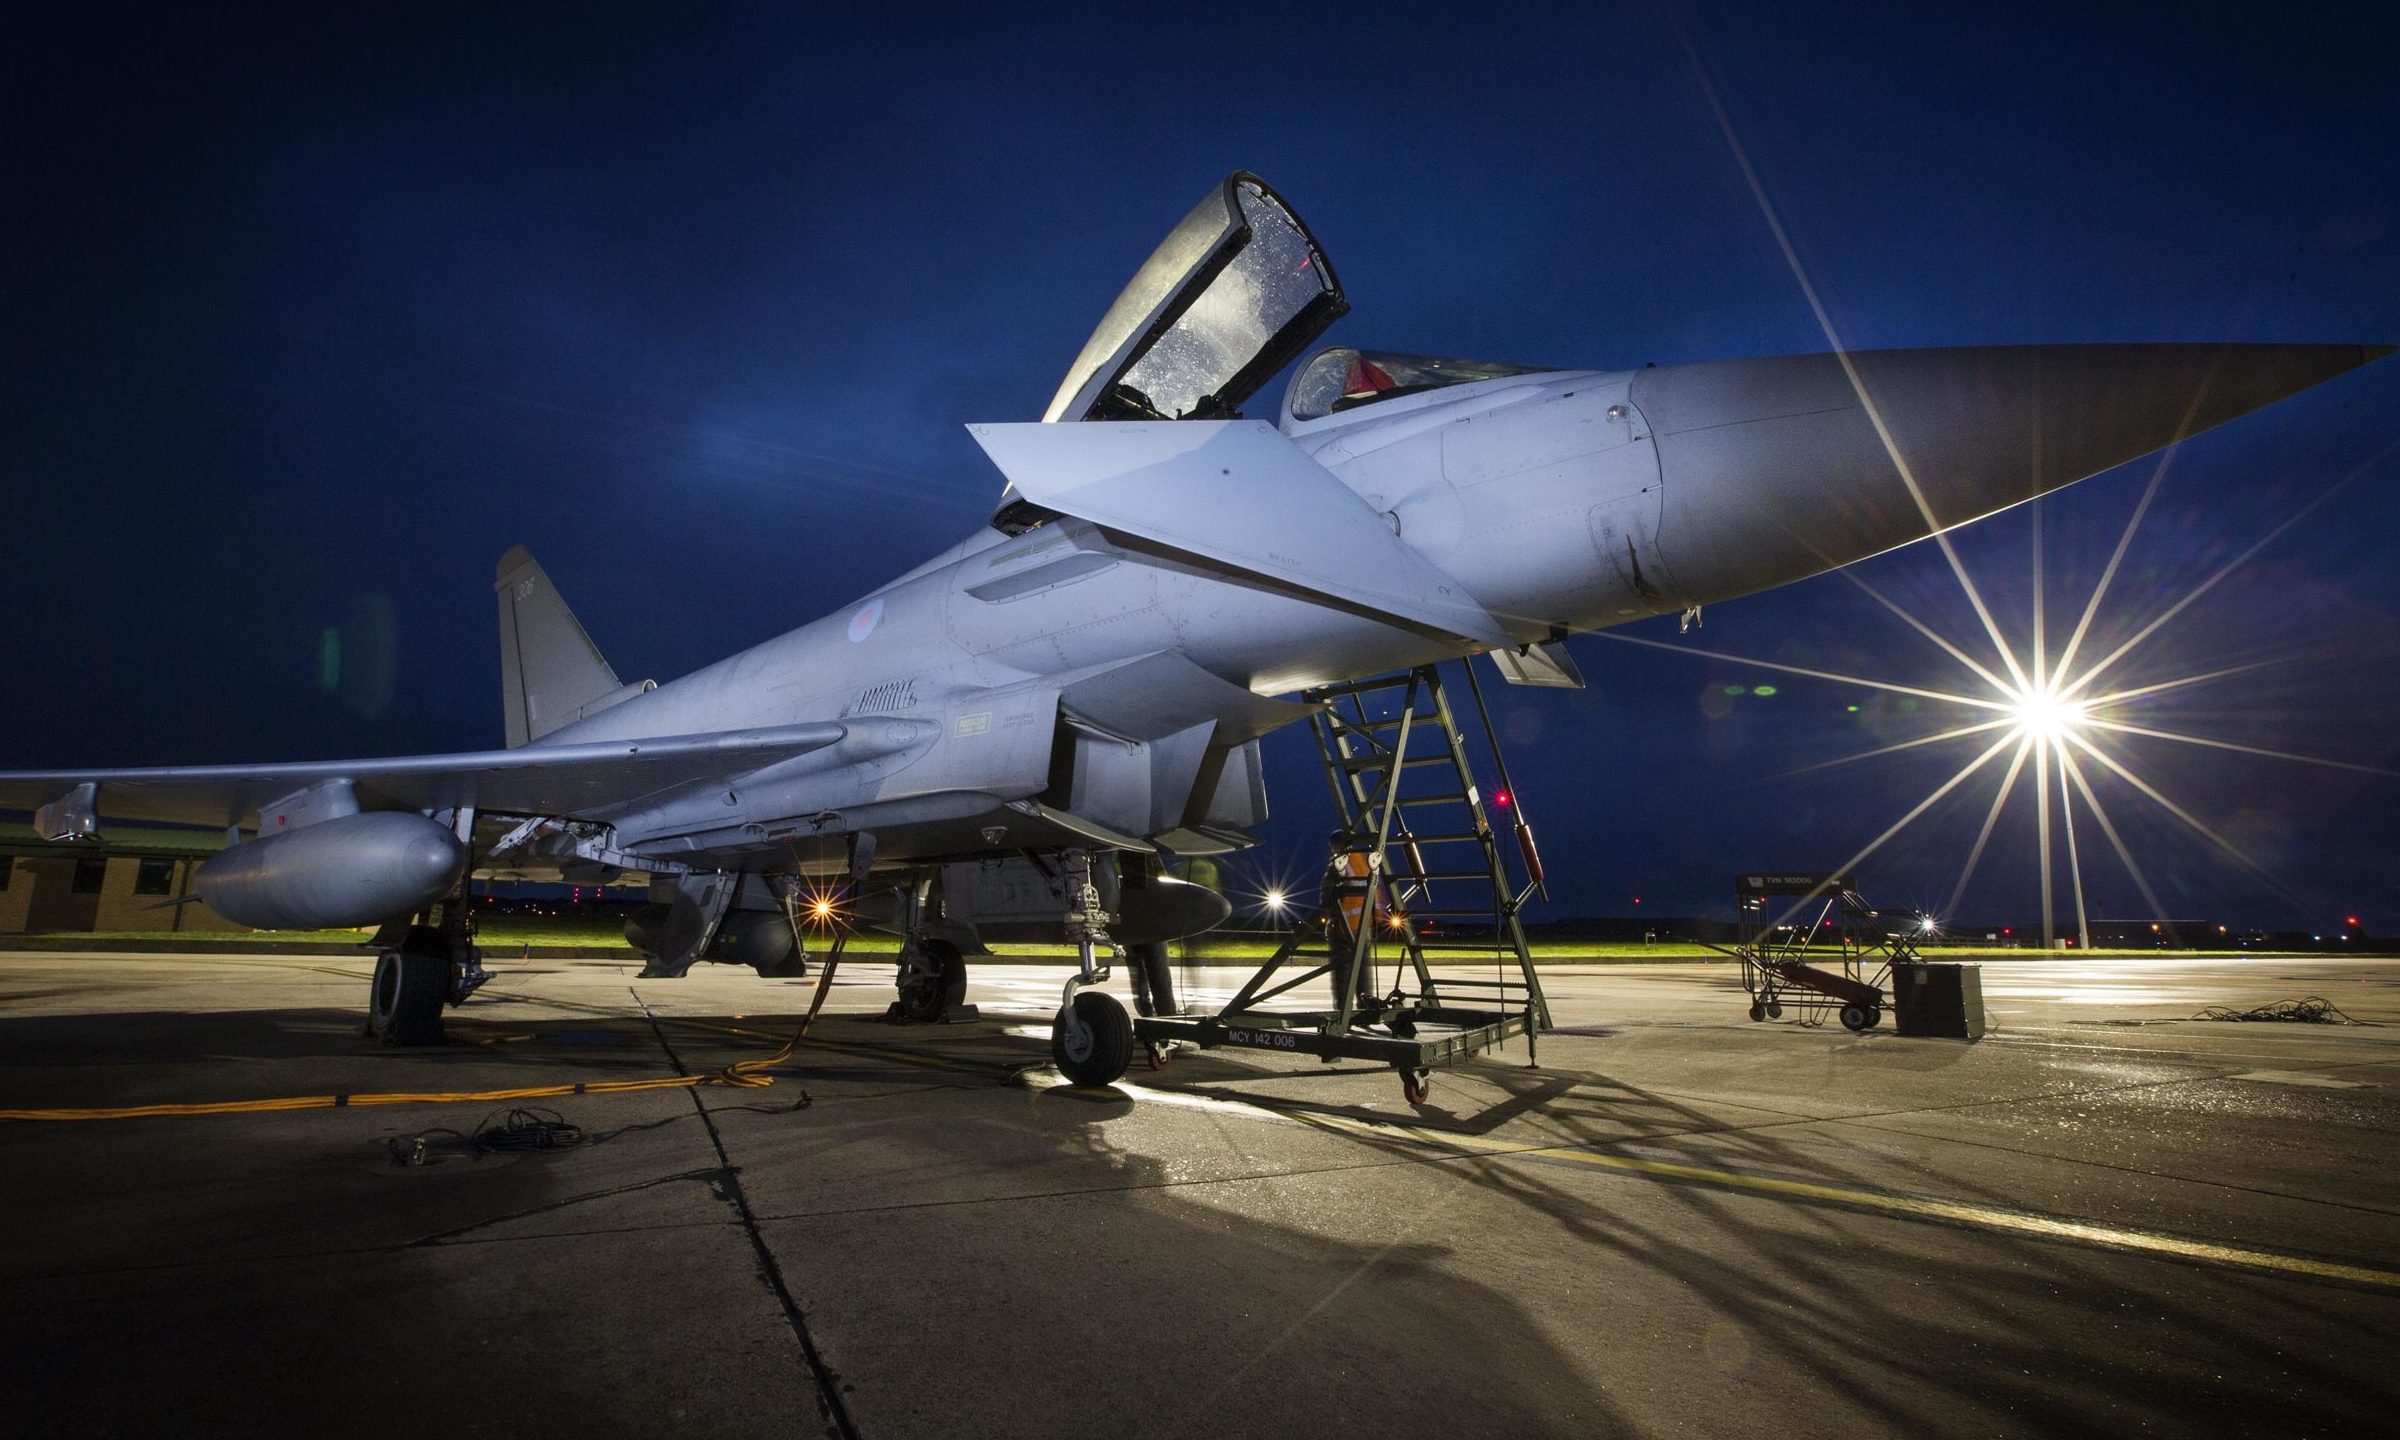 Eurofighter Typhoons taking part in a night-flying exercise.